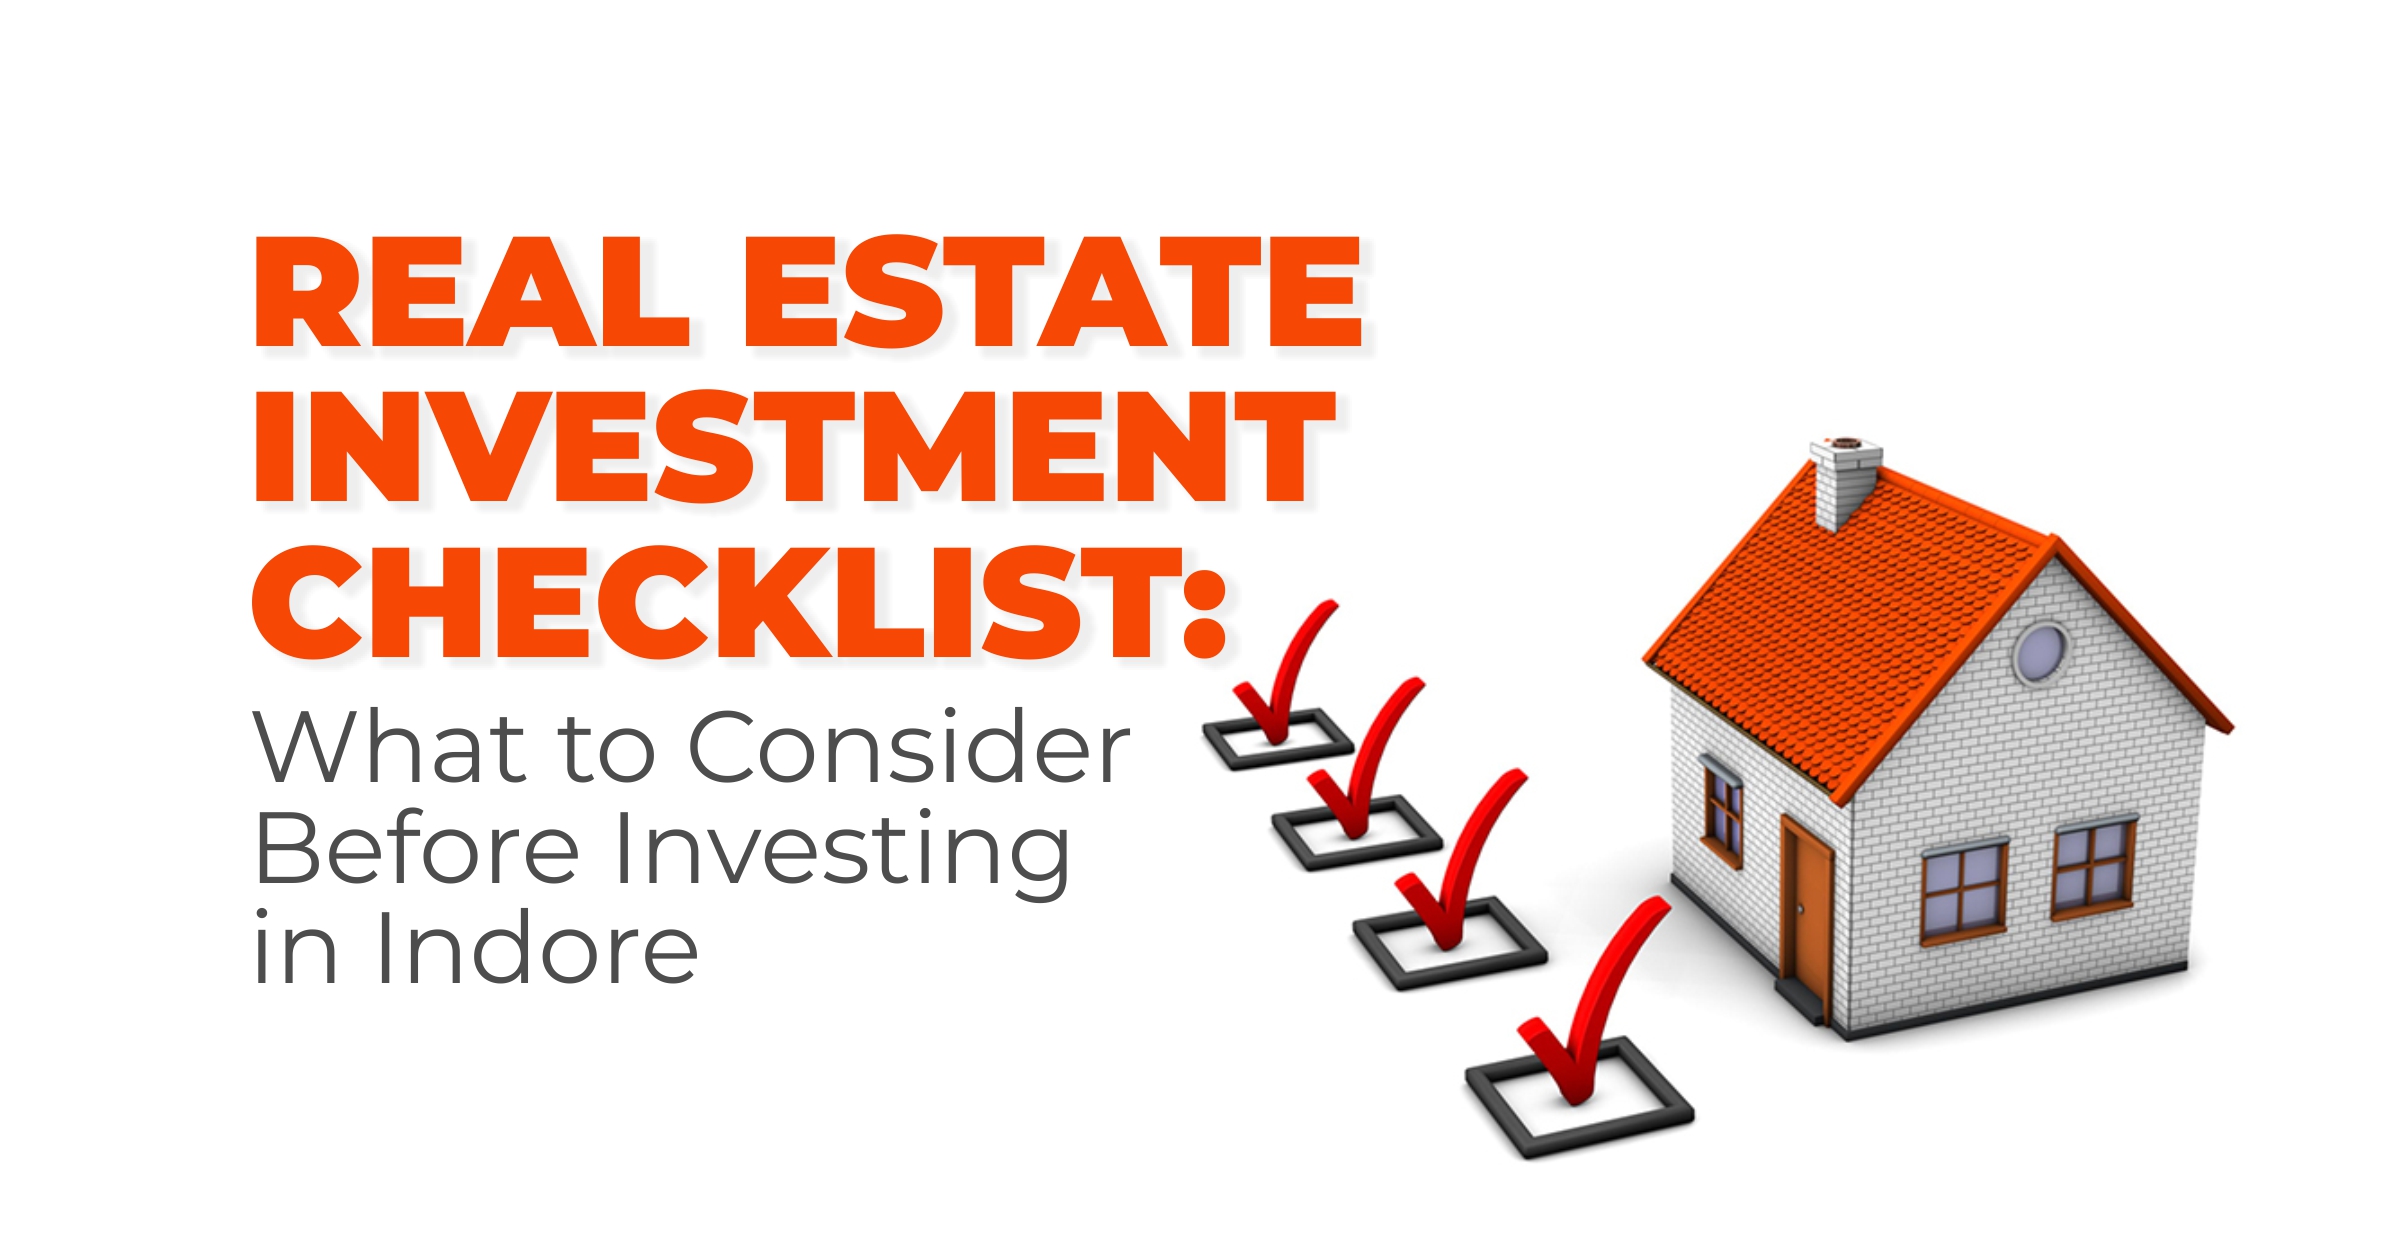 Real Estate Investment Checklist: What to Consider Before Investing in Indore